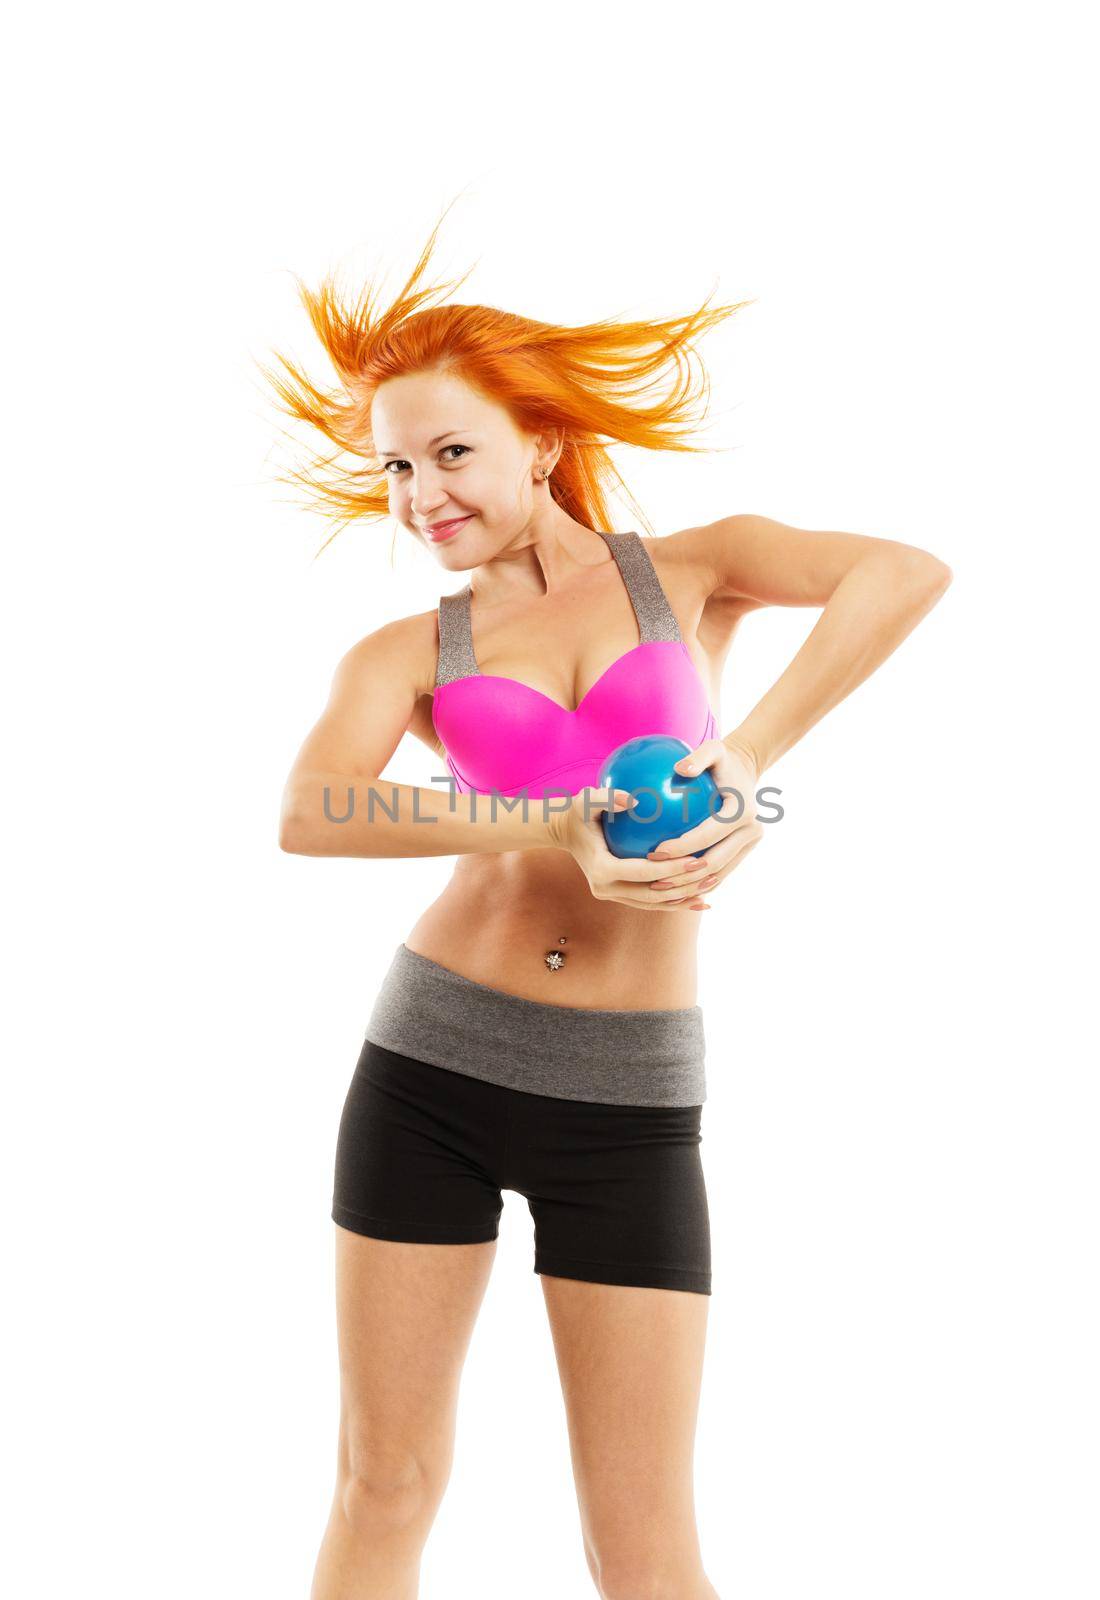 Young slim sensual red woman wearing sports bra practicing fitness